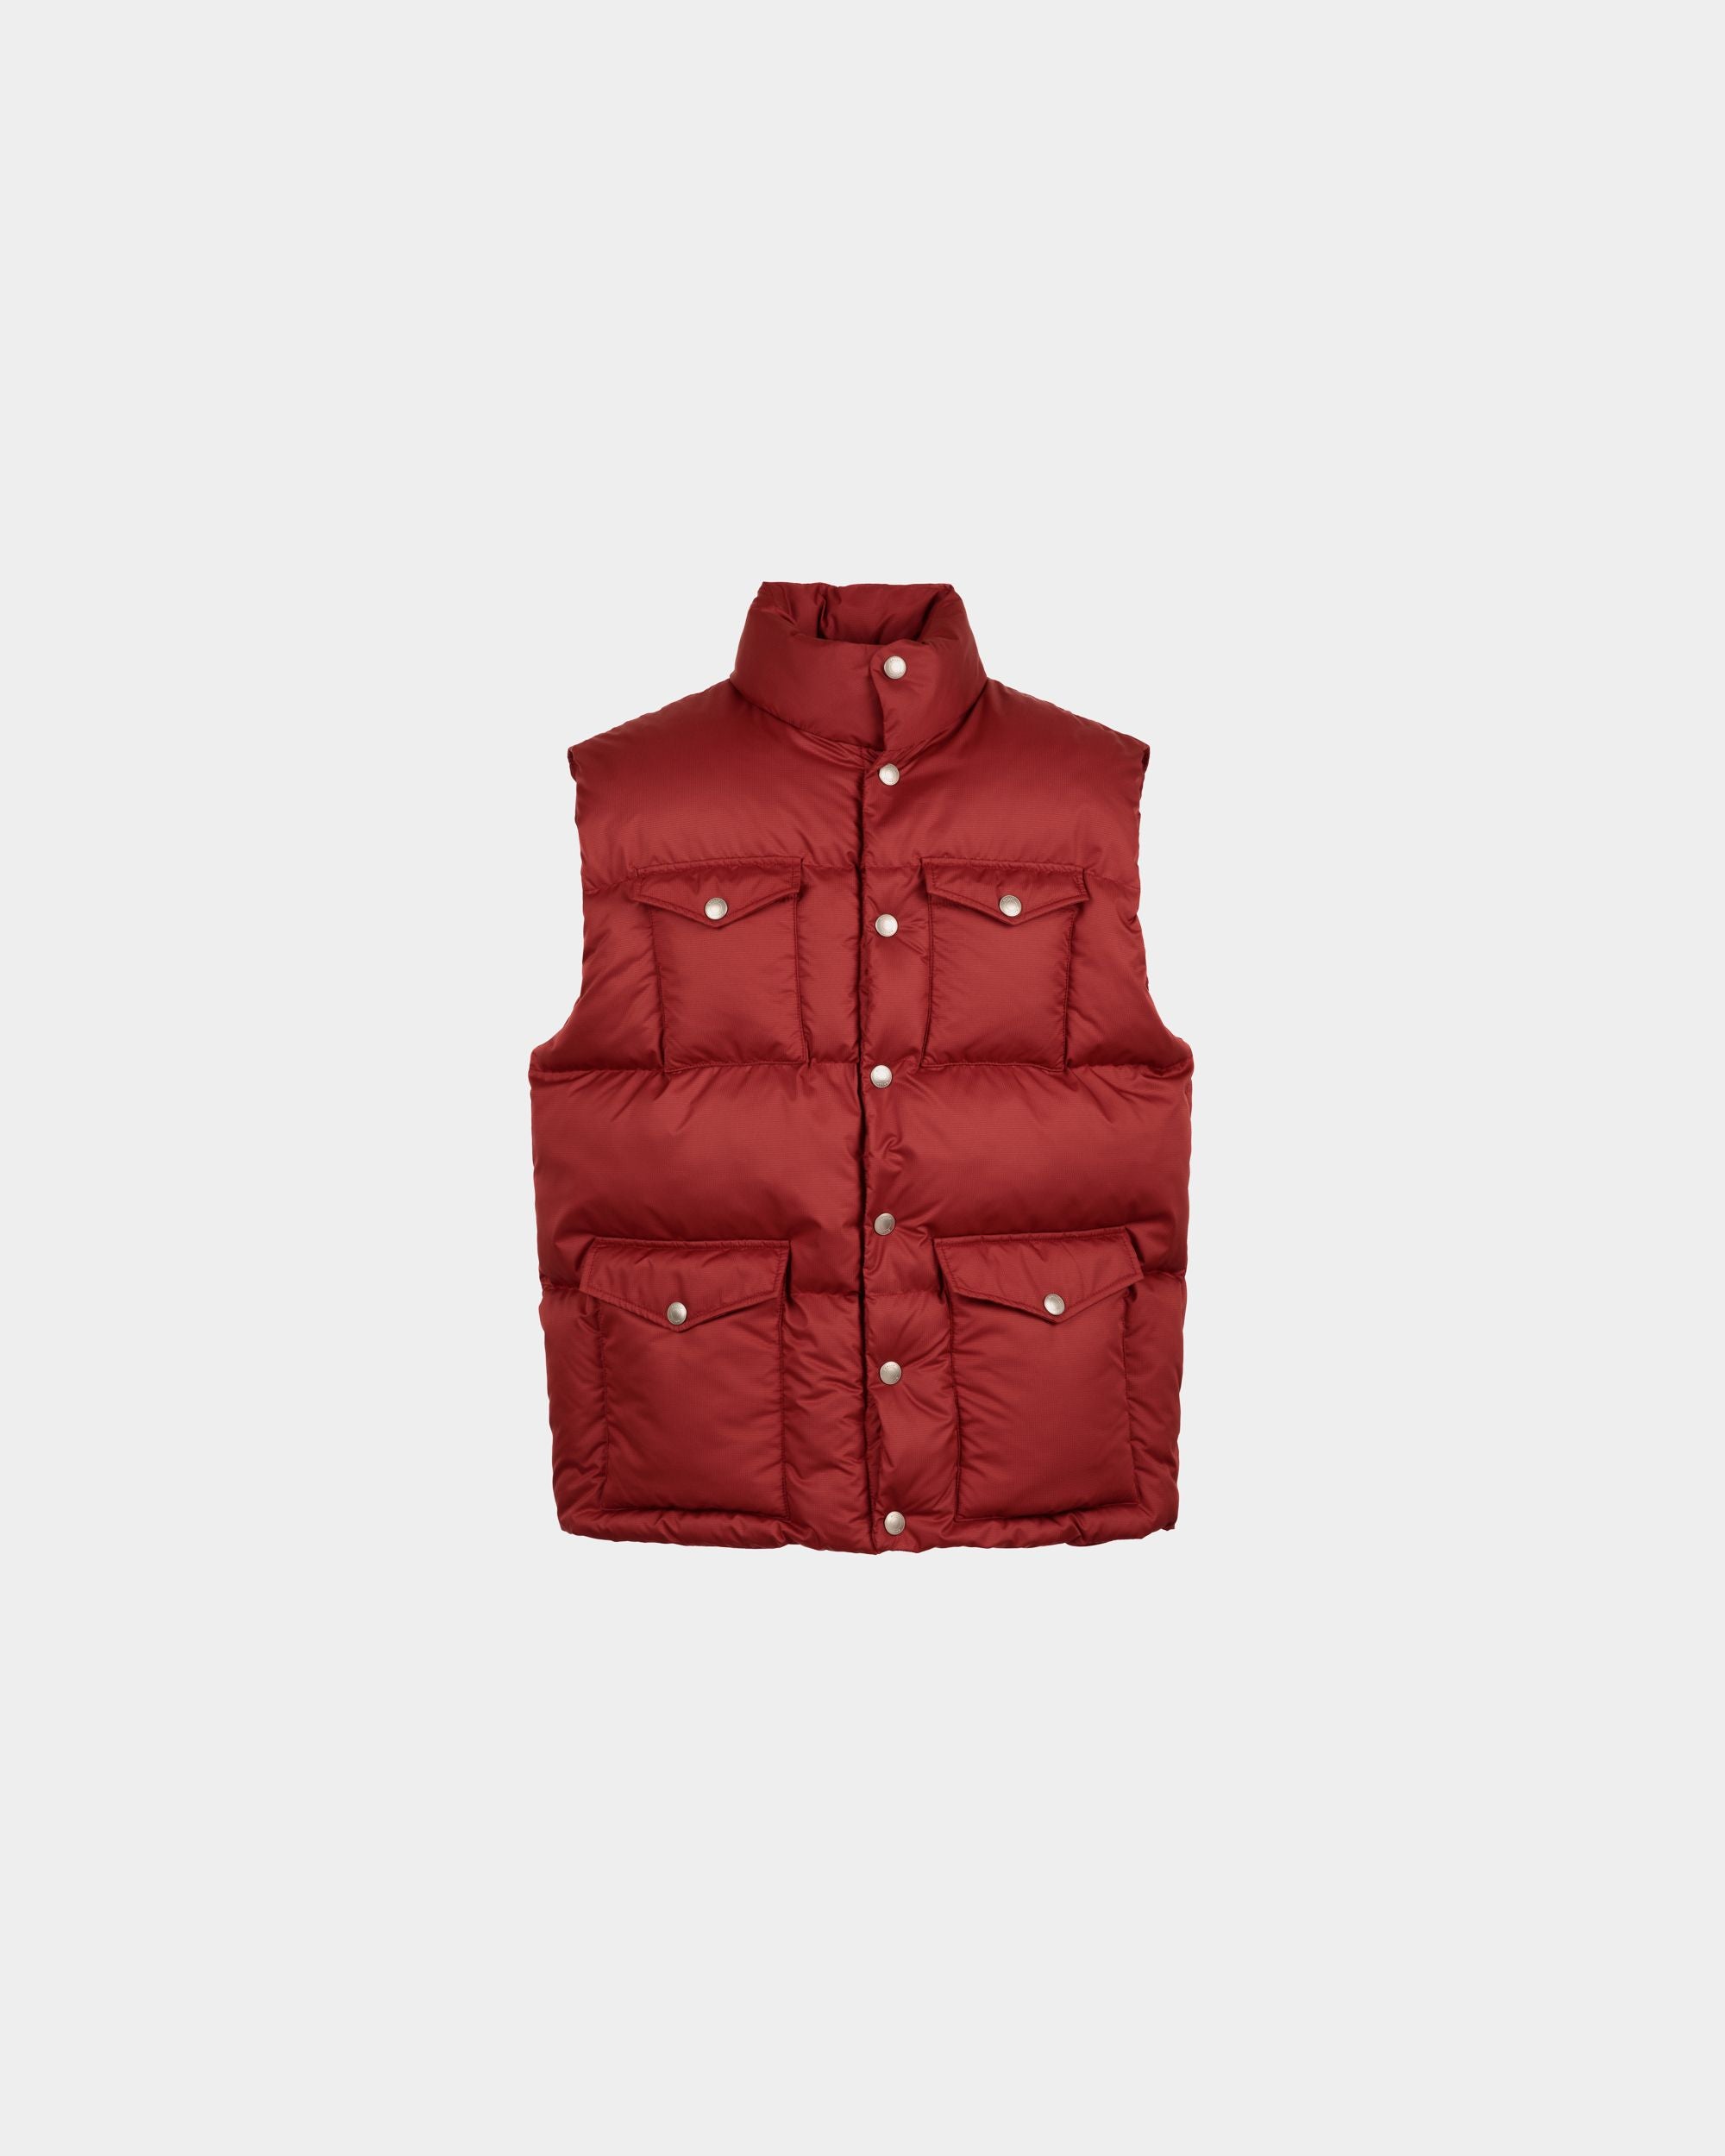 Bally padded vest 22AW collectionベスト